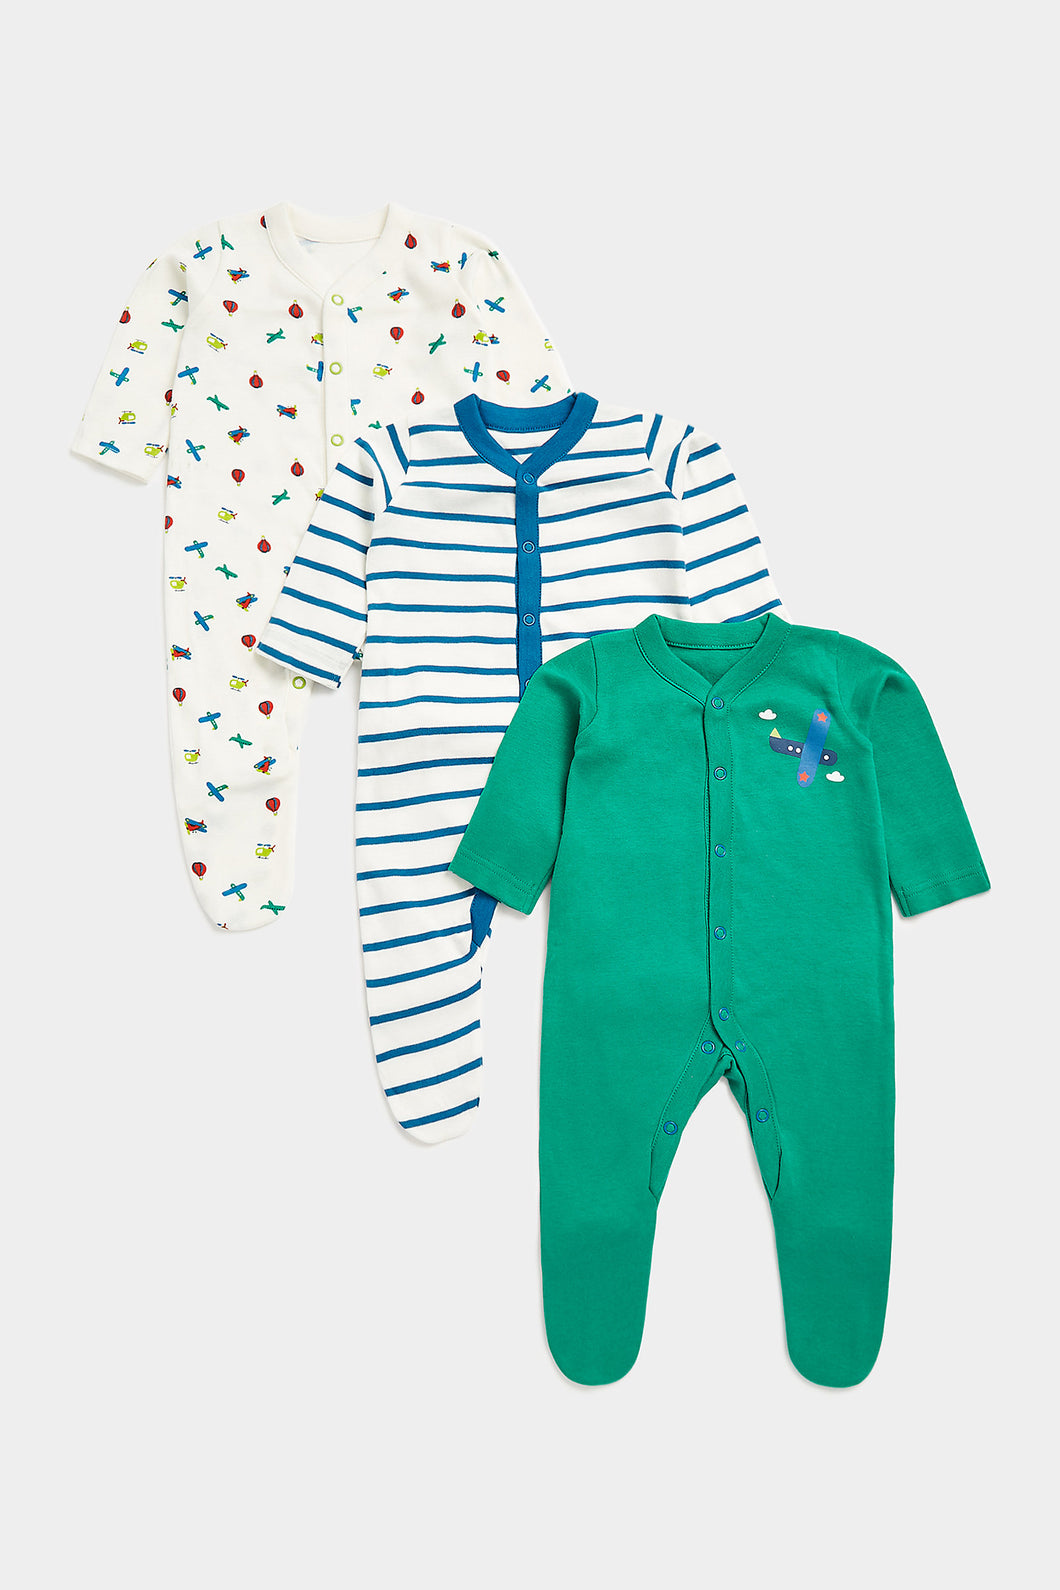 Mothercare Planes Sleepsuits - 3 Pack